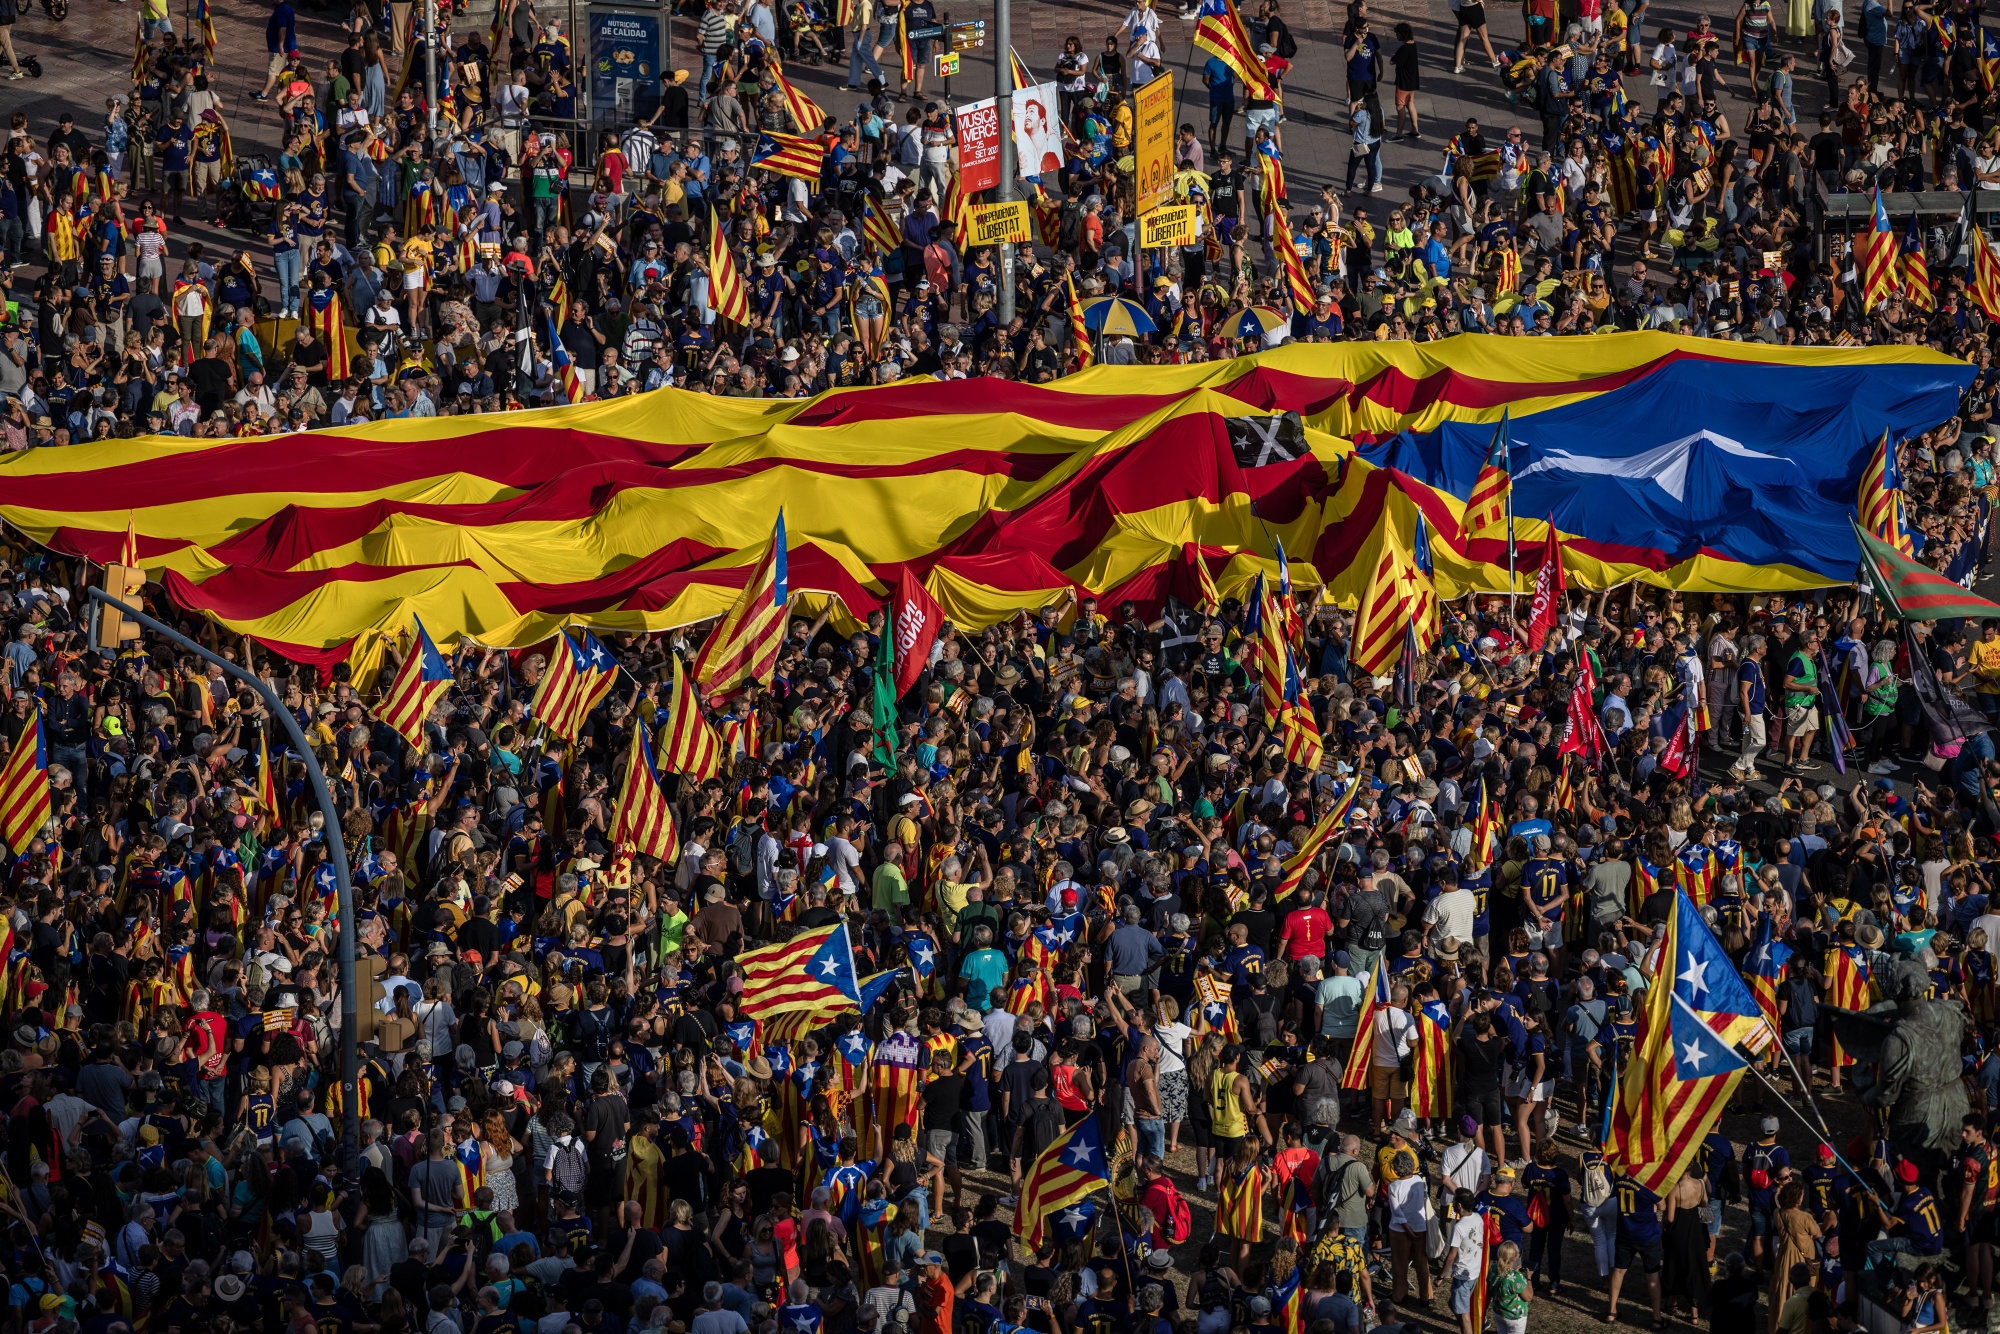 Catalans more negative on government than others in Spain